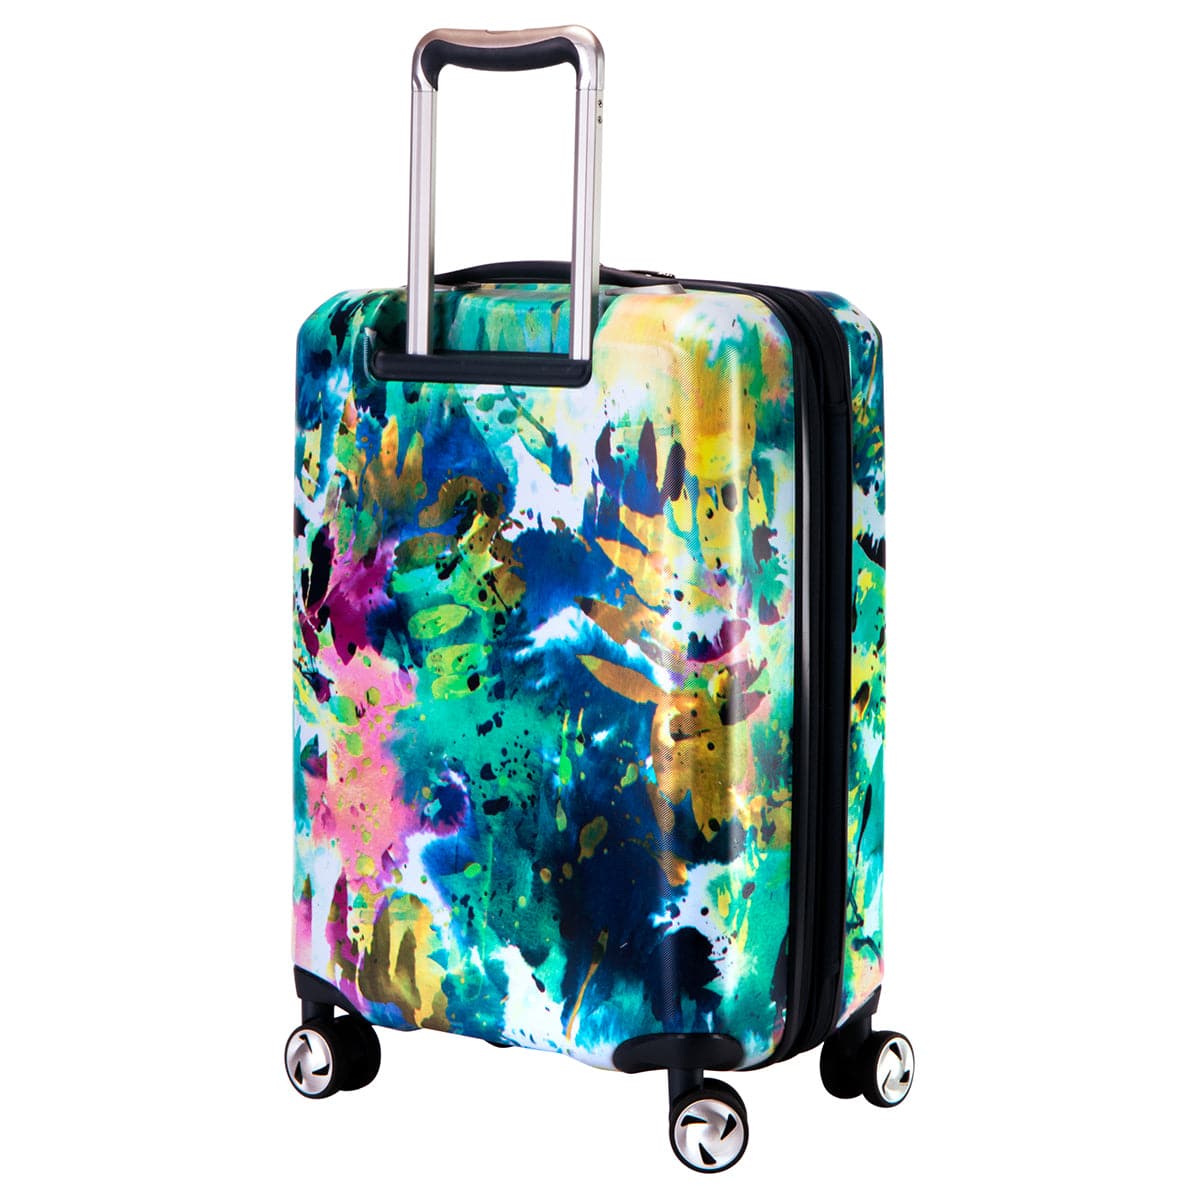 Ricardo Beverly Hills Beaumont Carry-On Luggage